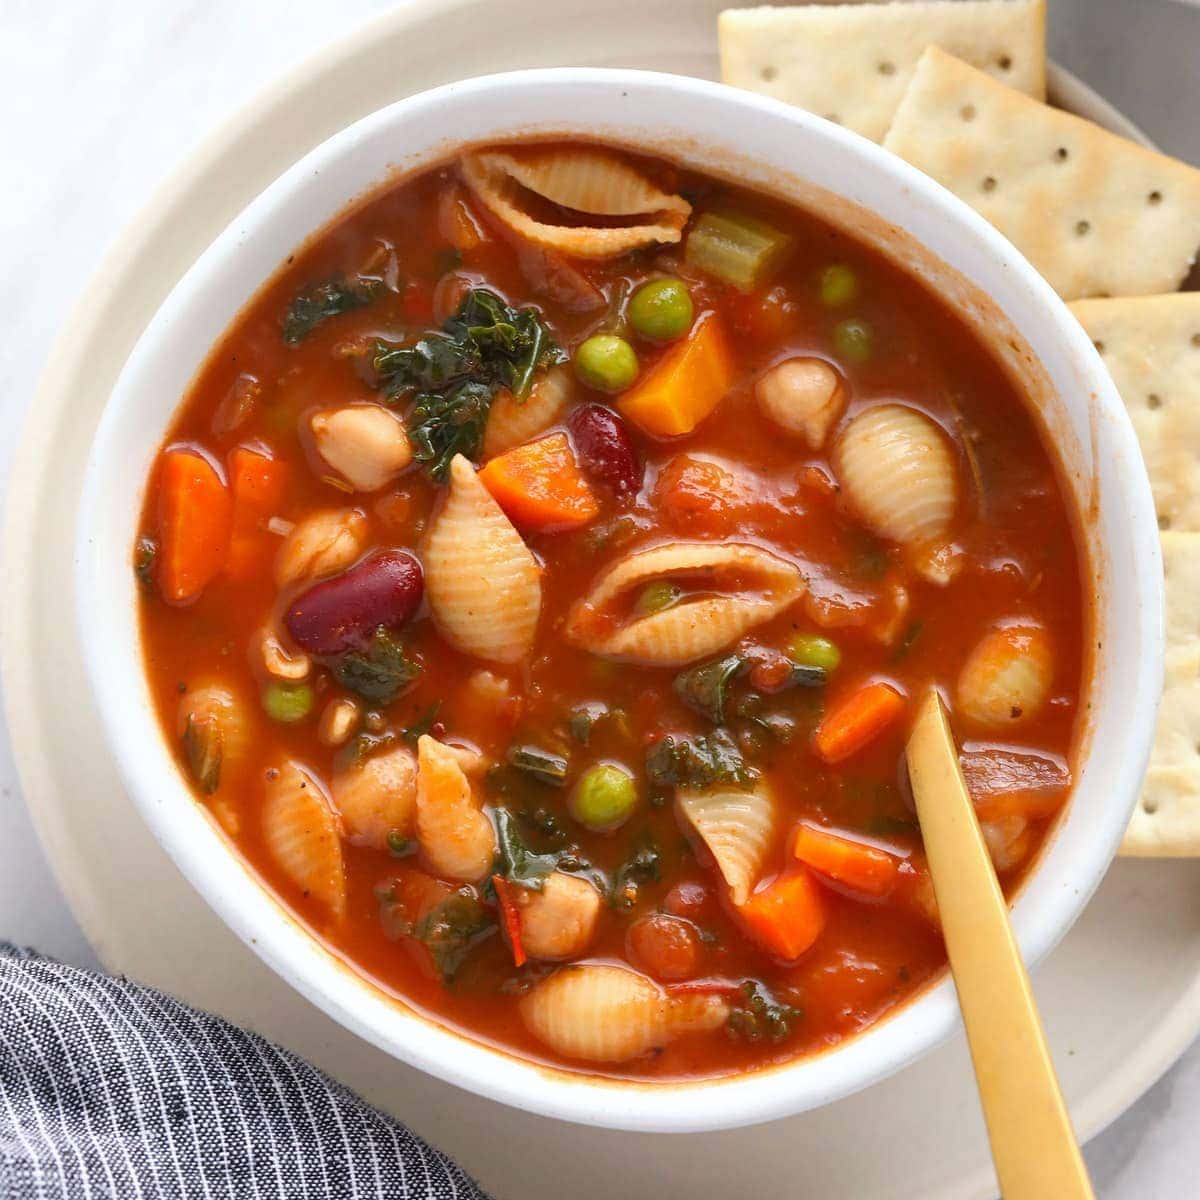 https://fitfoodiefinds.com/wp-content/uploads/2017/01/minestrone-soupsq.jpg